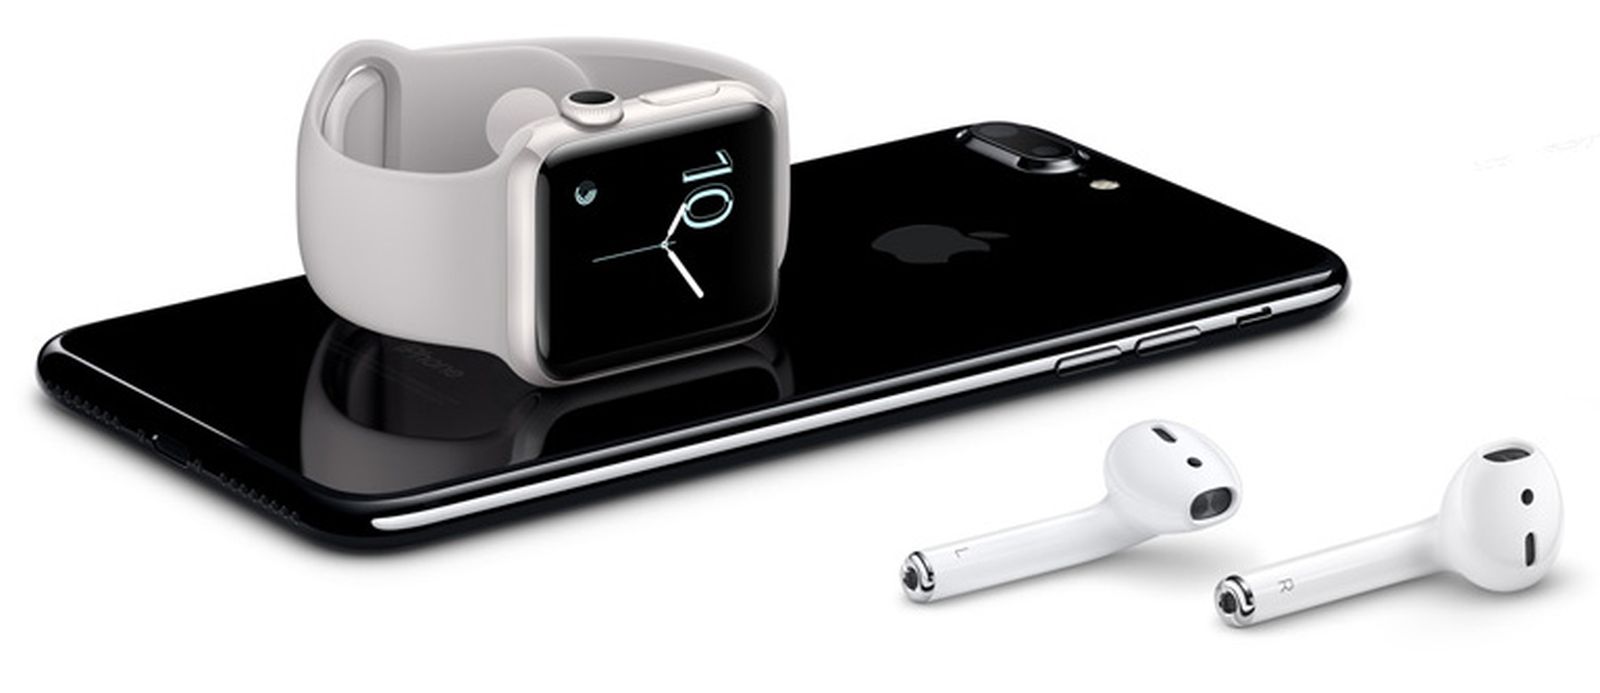 Gene Munster Predicts Apple Will Eventually Earn More From AirPods